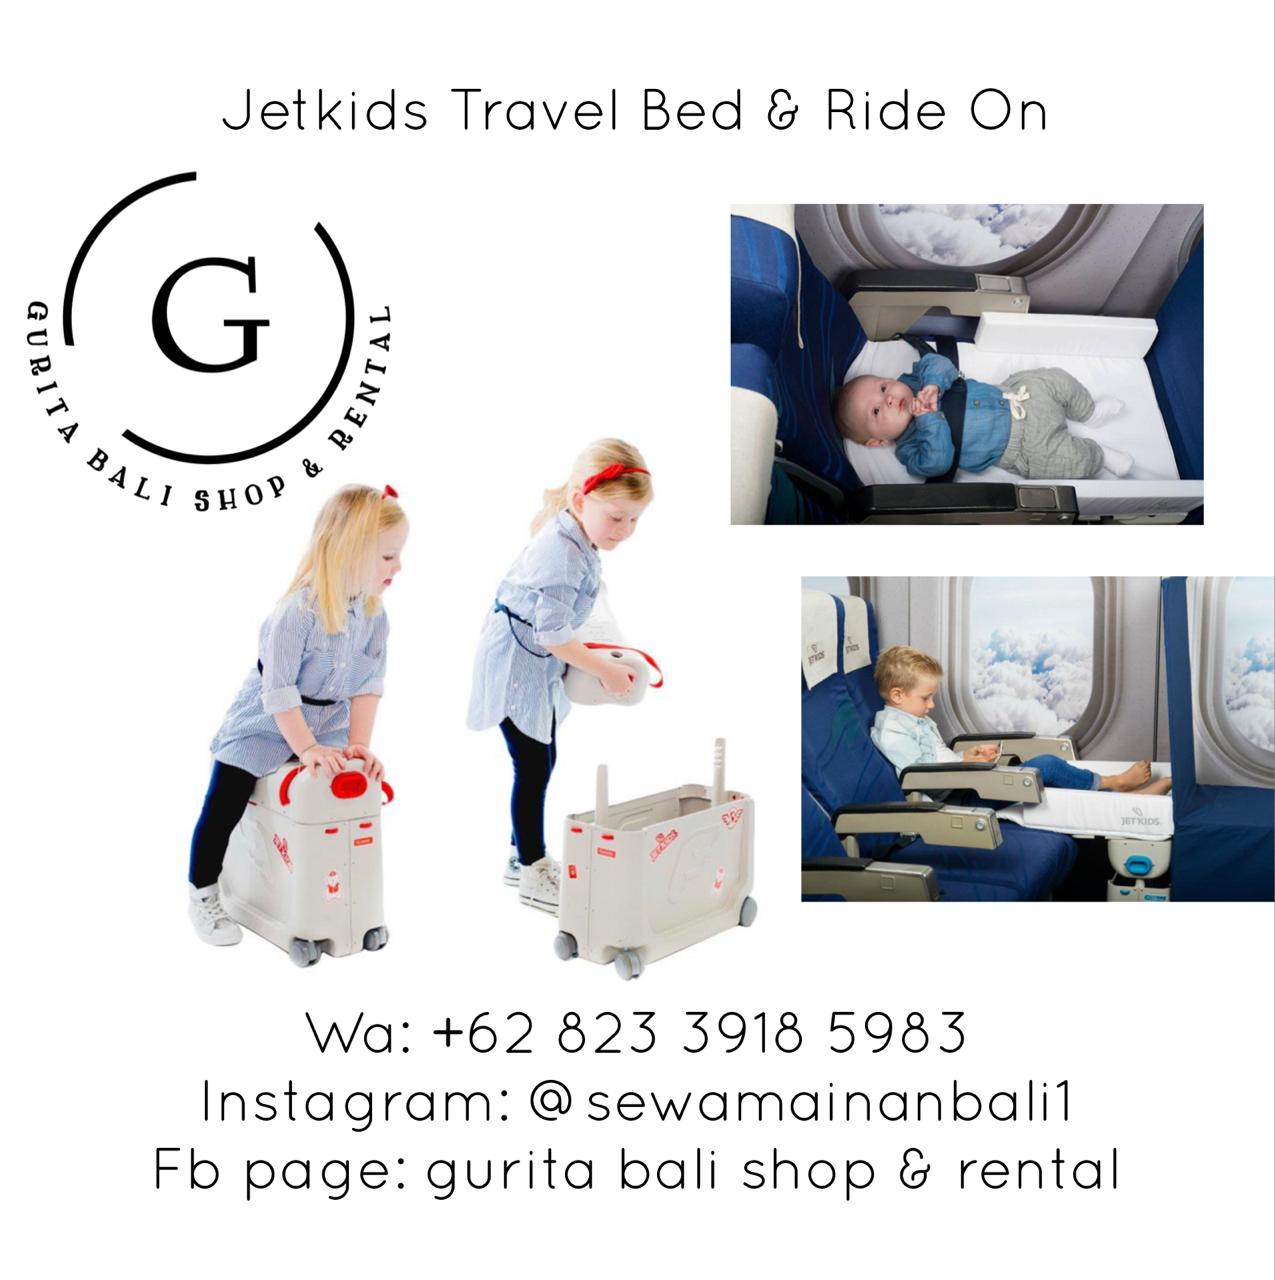 JETKIDS TRAVEL BED & RIDE ON